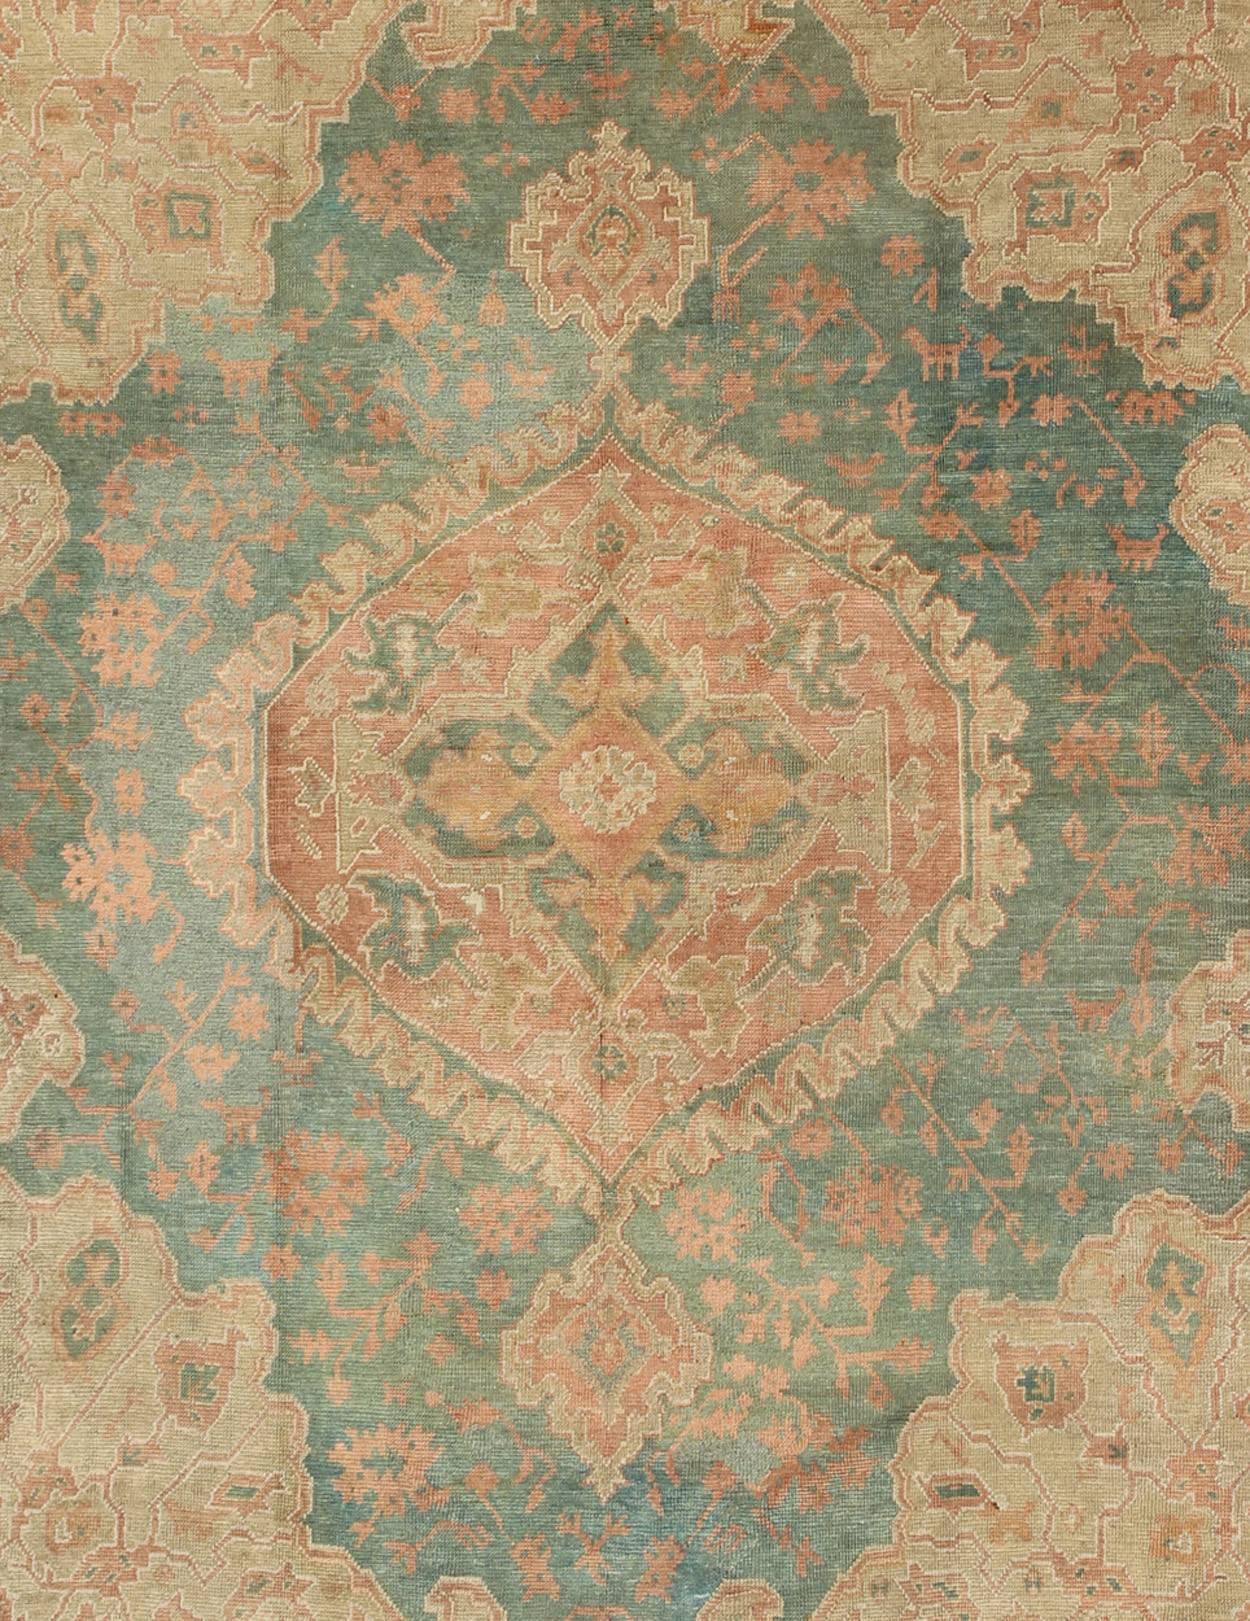 Hand-Knotted Antique Turkish Medallion Oushak Rug in Teal Green, Rose and Buttery Colors